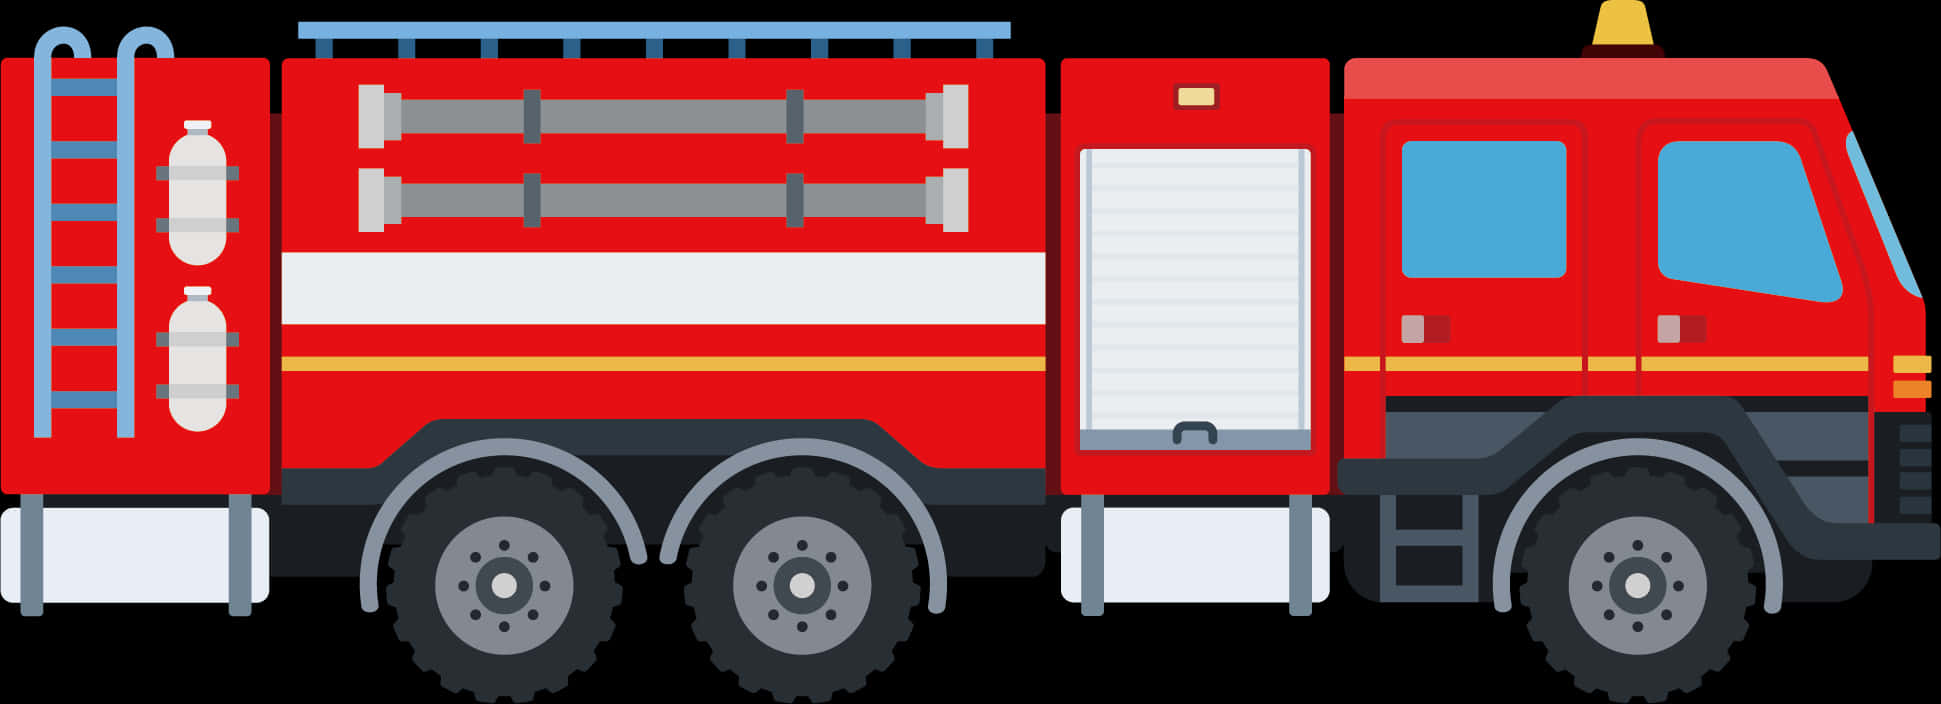 A Red Fire Truck With White Stripes